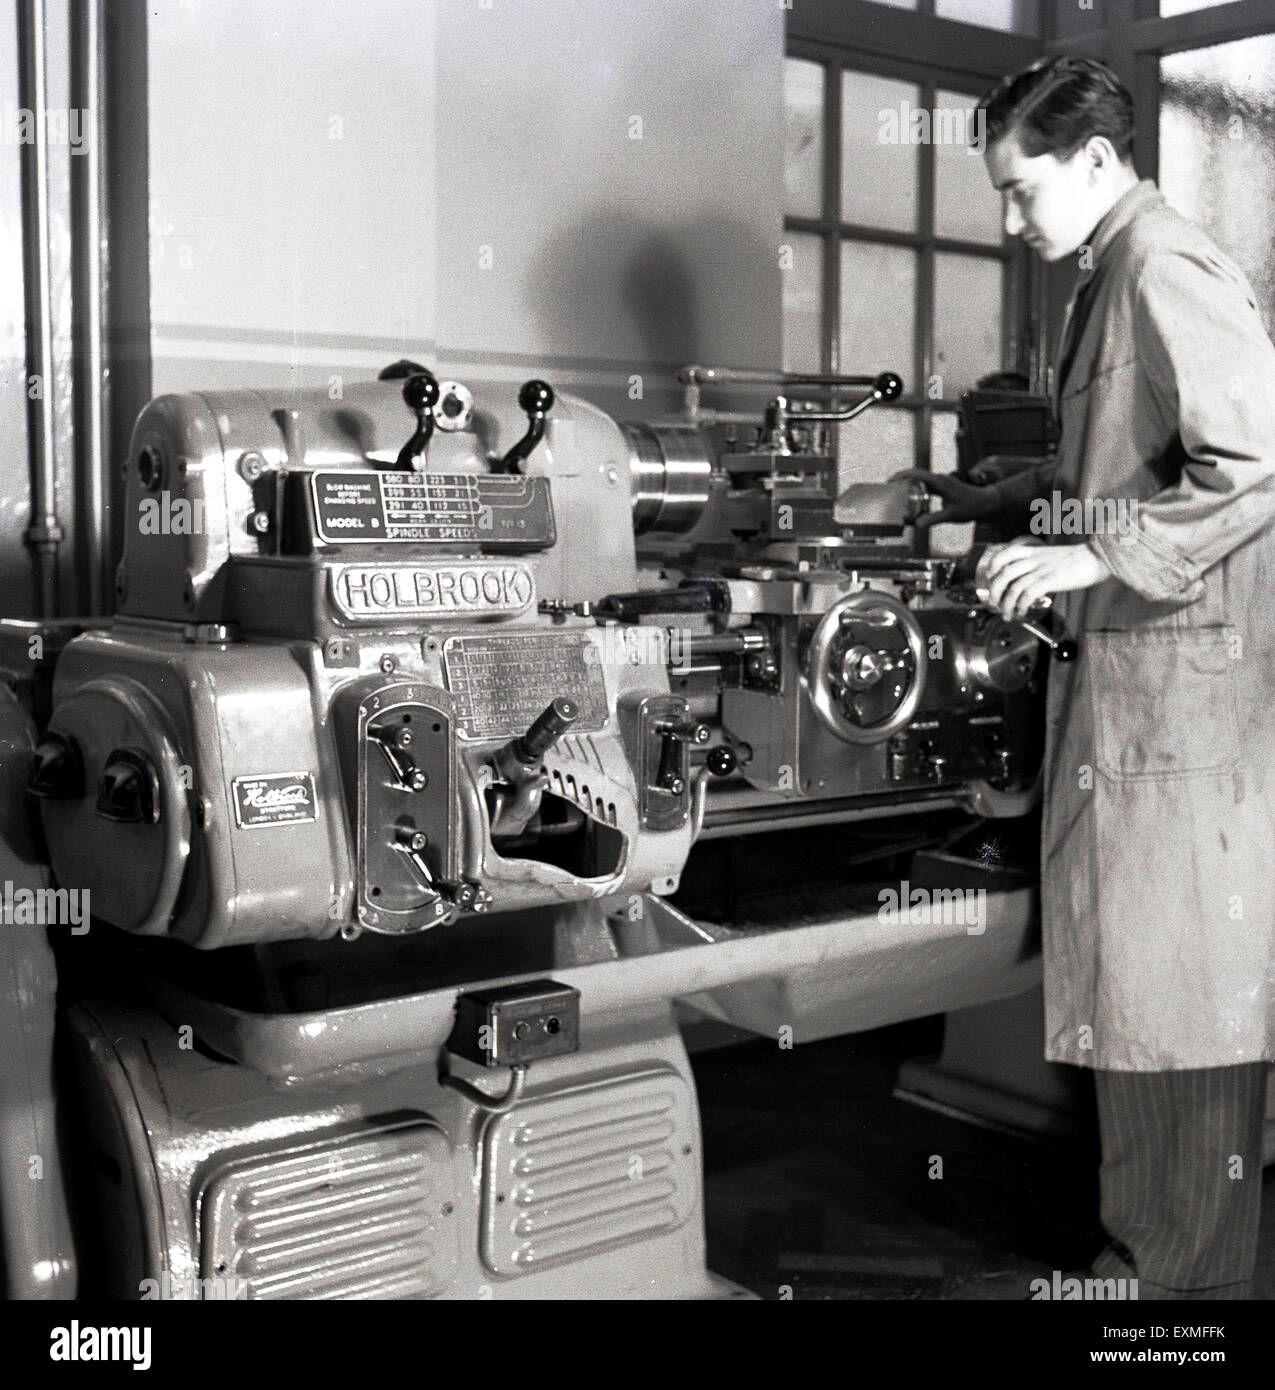 1950s, historical picture showing a young adult male using a sophiscated precision engineering machine tool, a mechanical bench lathe made by the Holbrook Machine Tool Co, a British company founded in 1850. In 1917 it started making self-contained motor-driven lathes and later manufactured precision optical chasing lathes, of which a large version is seen in the picture. Stock Photo